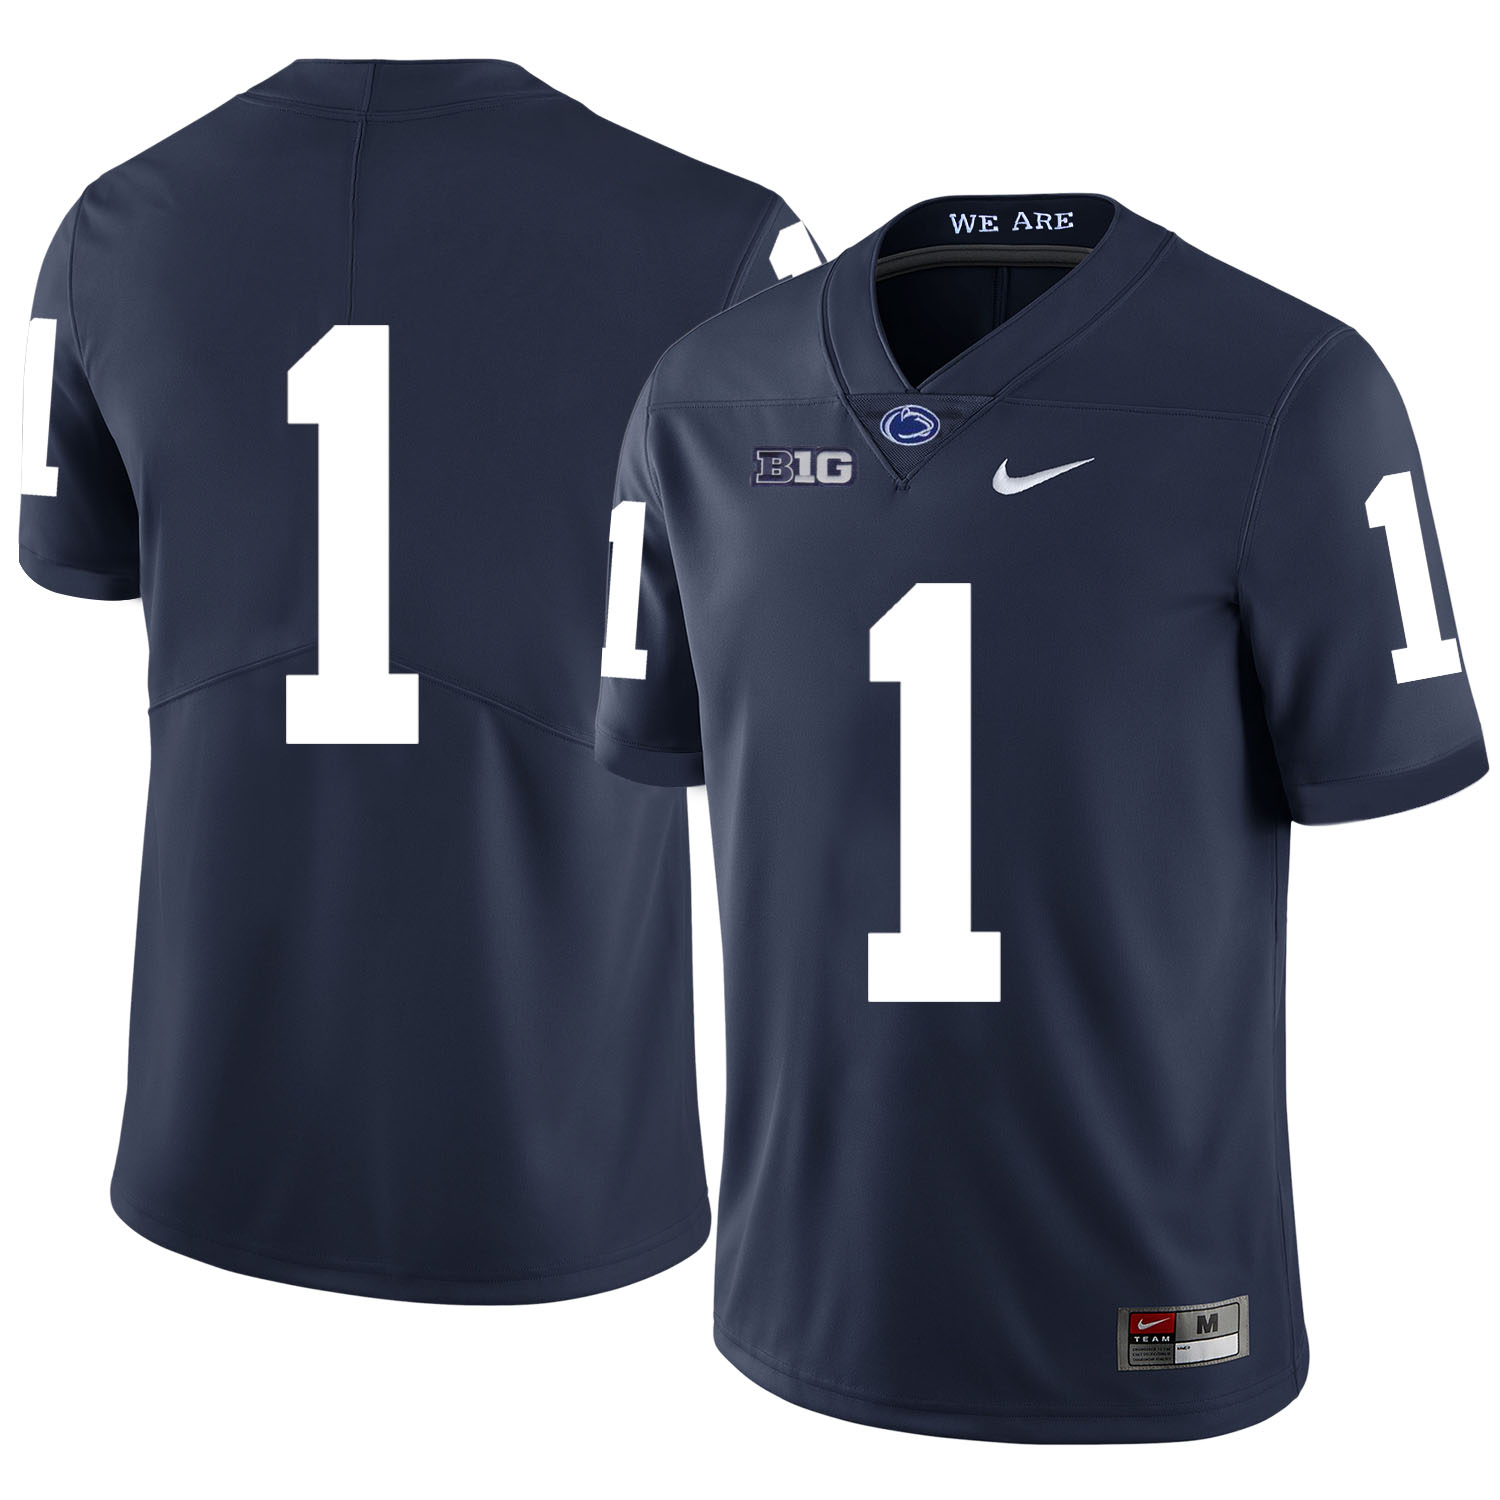 Penn State Nittany Lions 1 Joe Paterno Navy Nike College Football Jersey